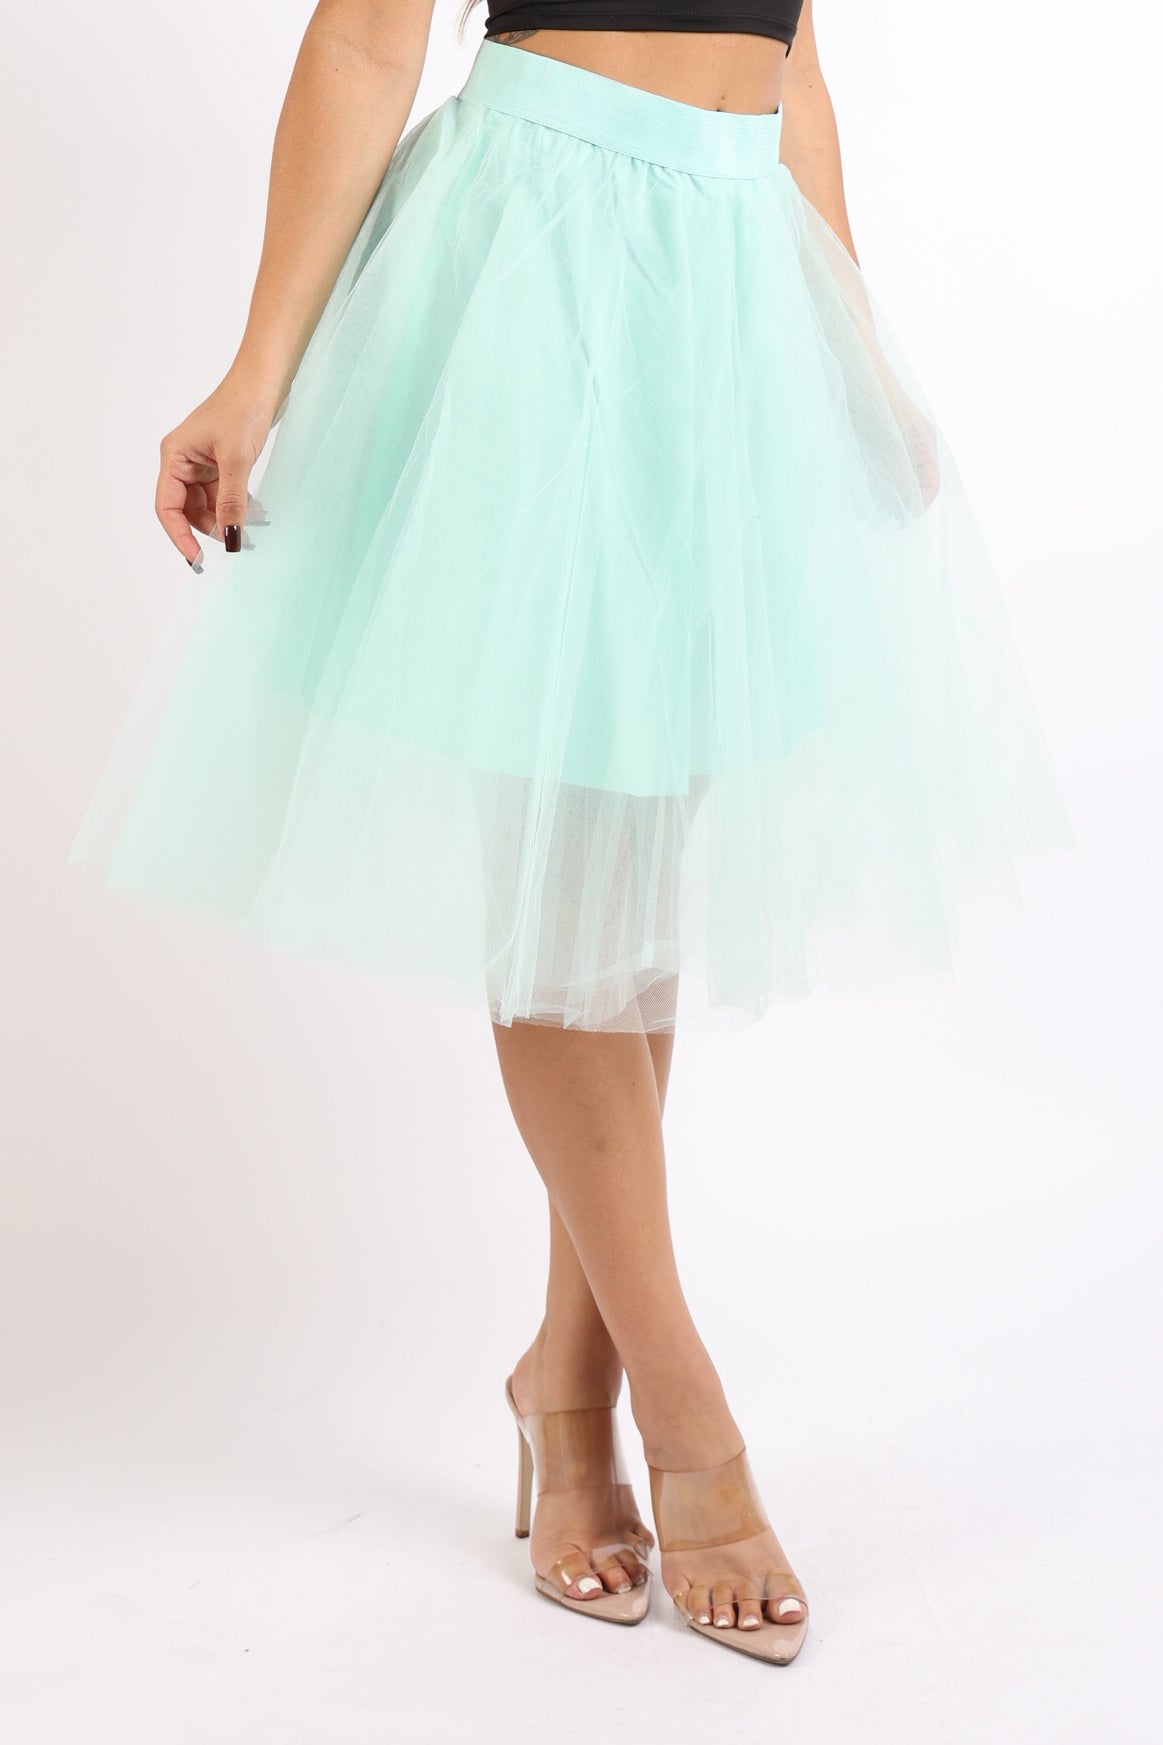 Tutu Tulle Knee Length A Line Ballet Dance Prom Party Layers Skirt